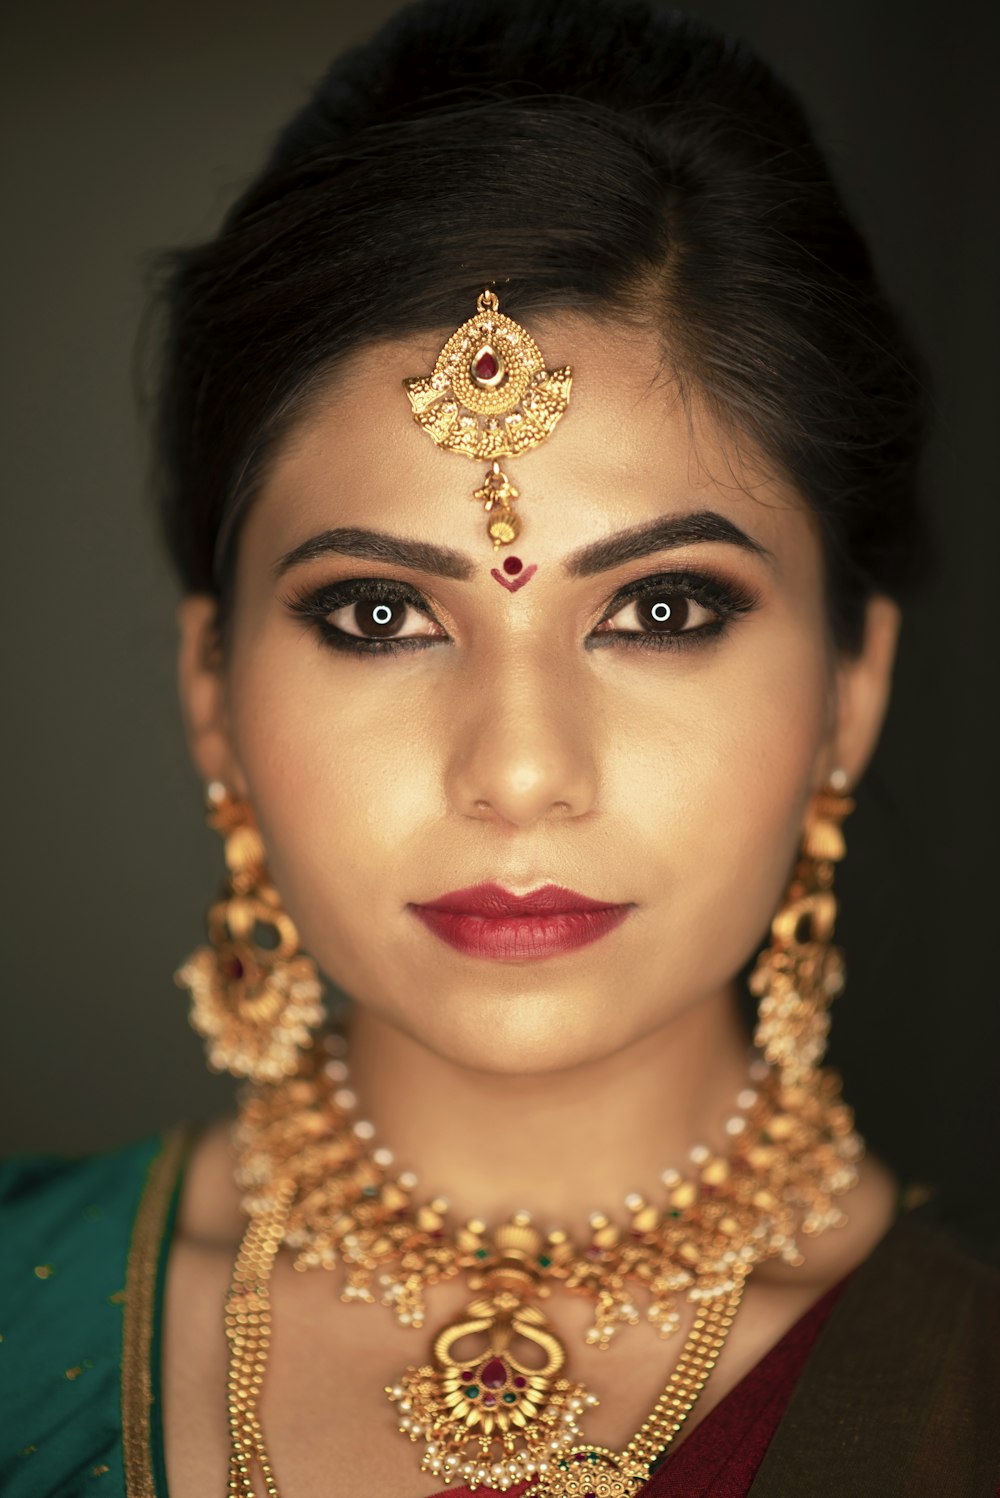 woman wearing gold dangling earrings and necklace